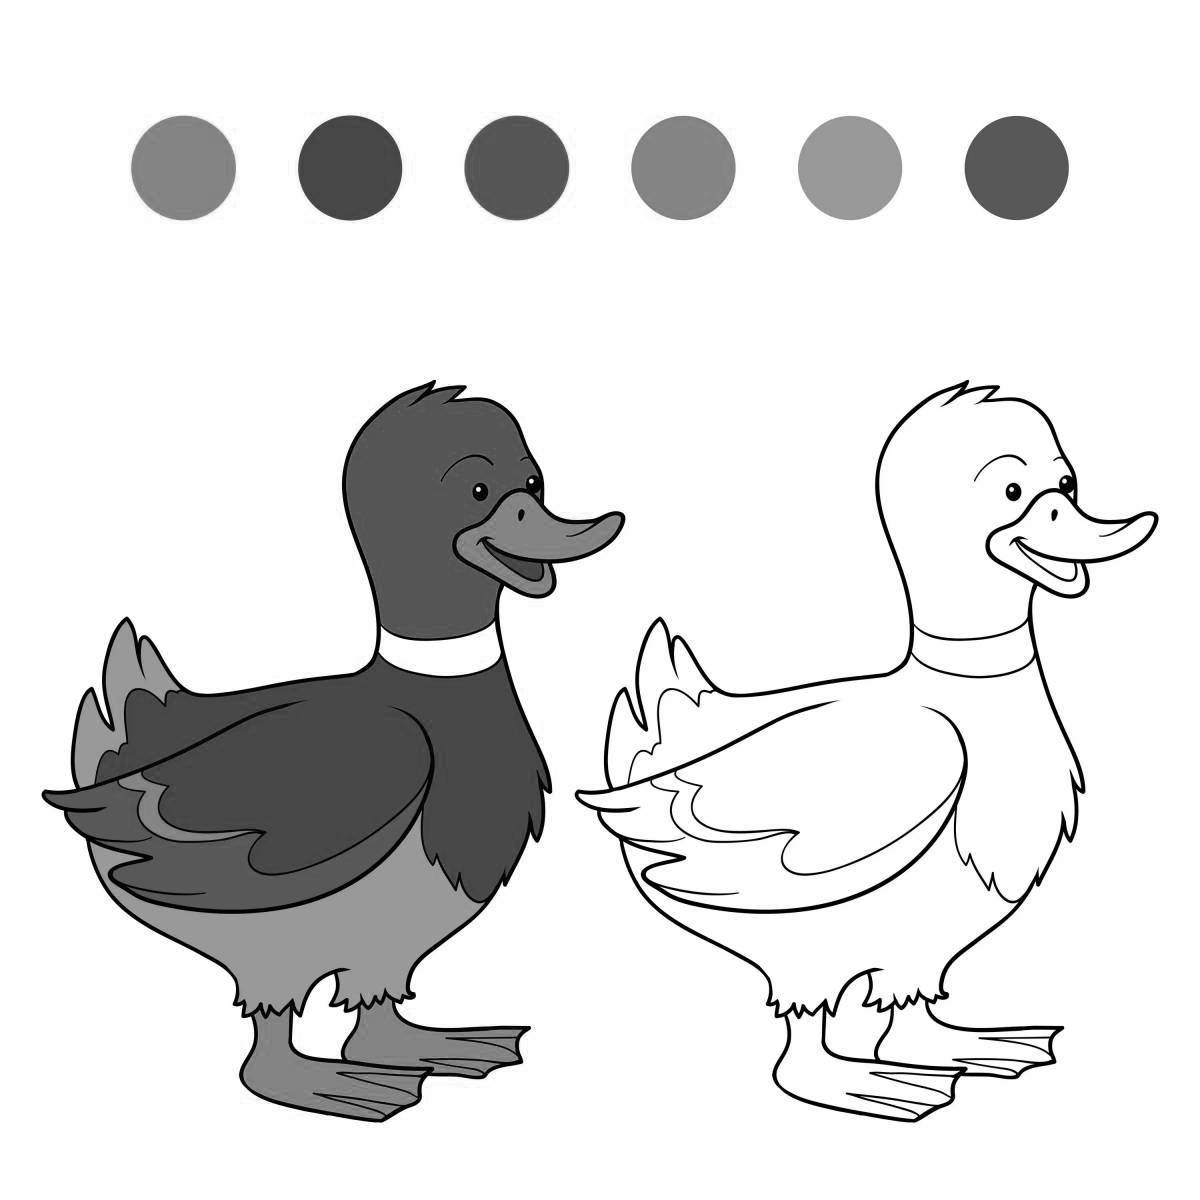 Fun duck game page